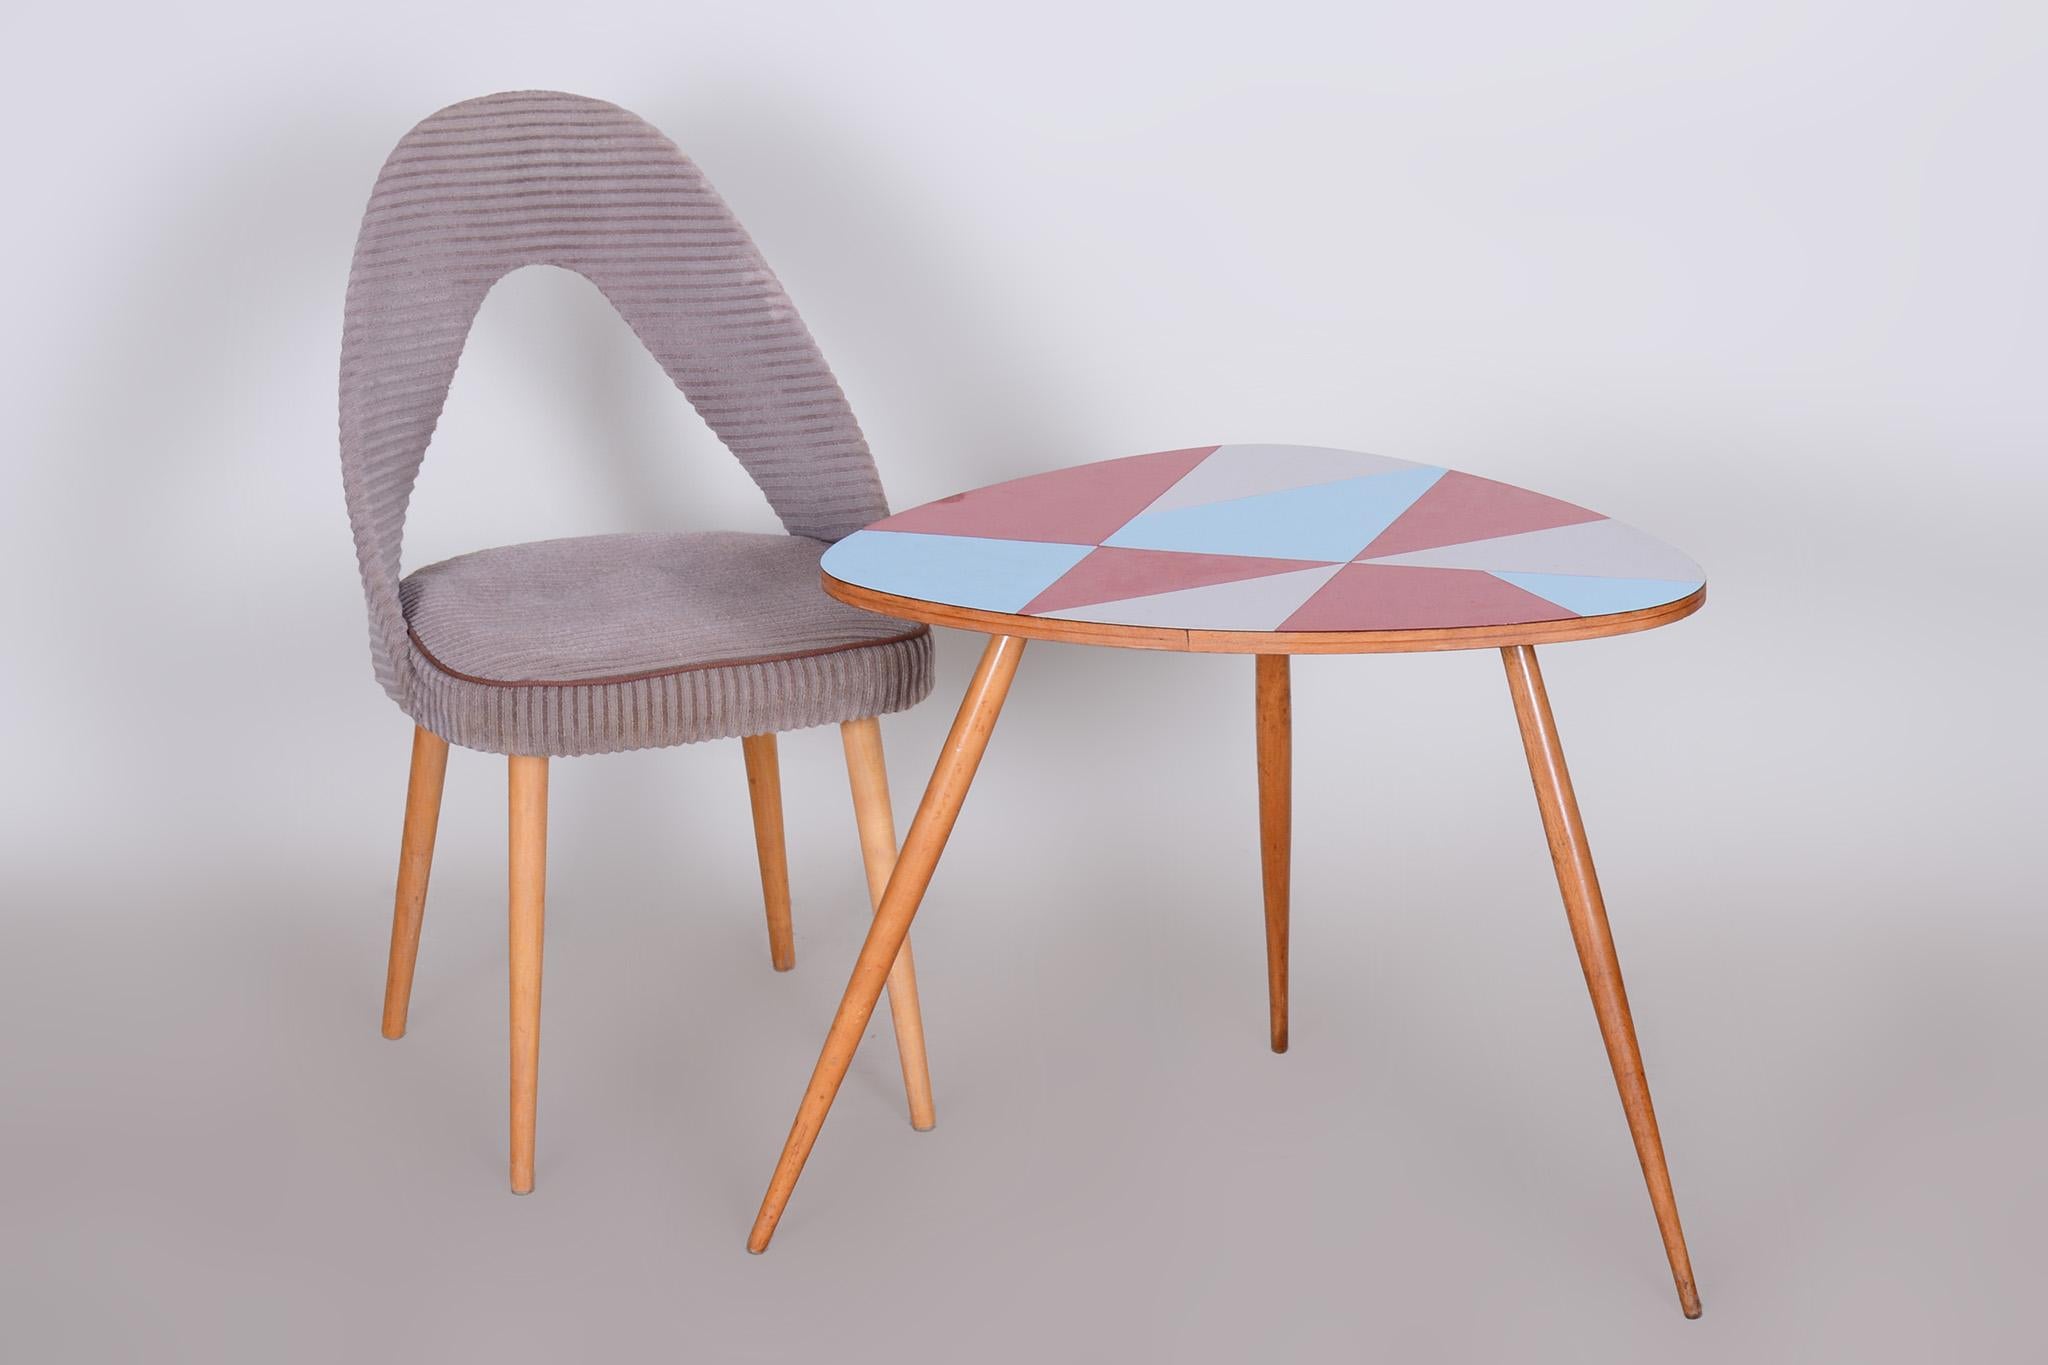 Small Restored Midcentury Table, Beech and Umakart, Czechia, 1950s For Sale 3